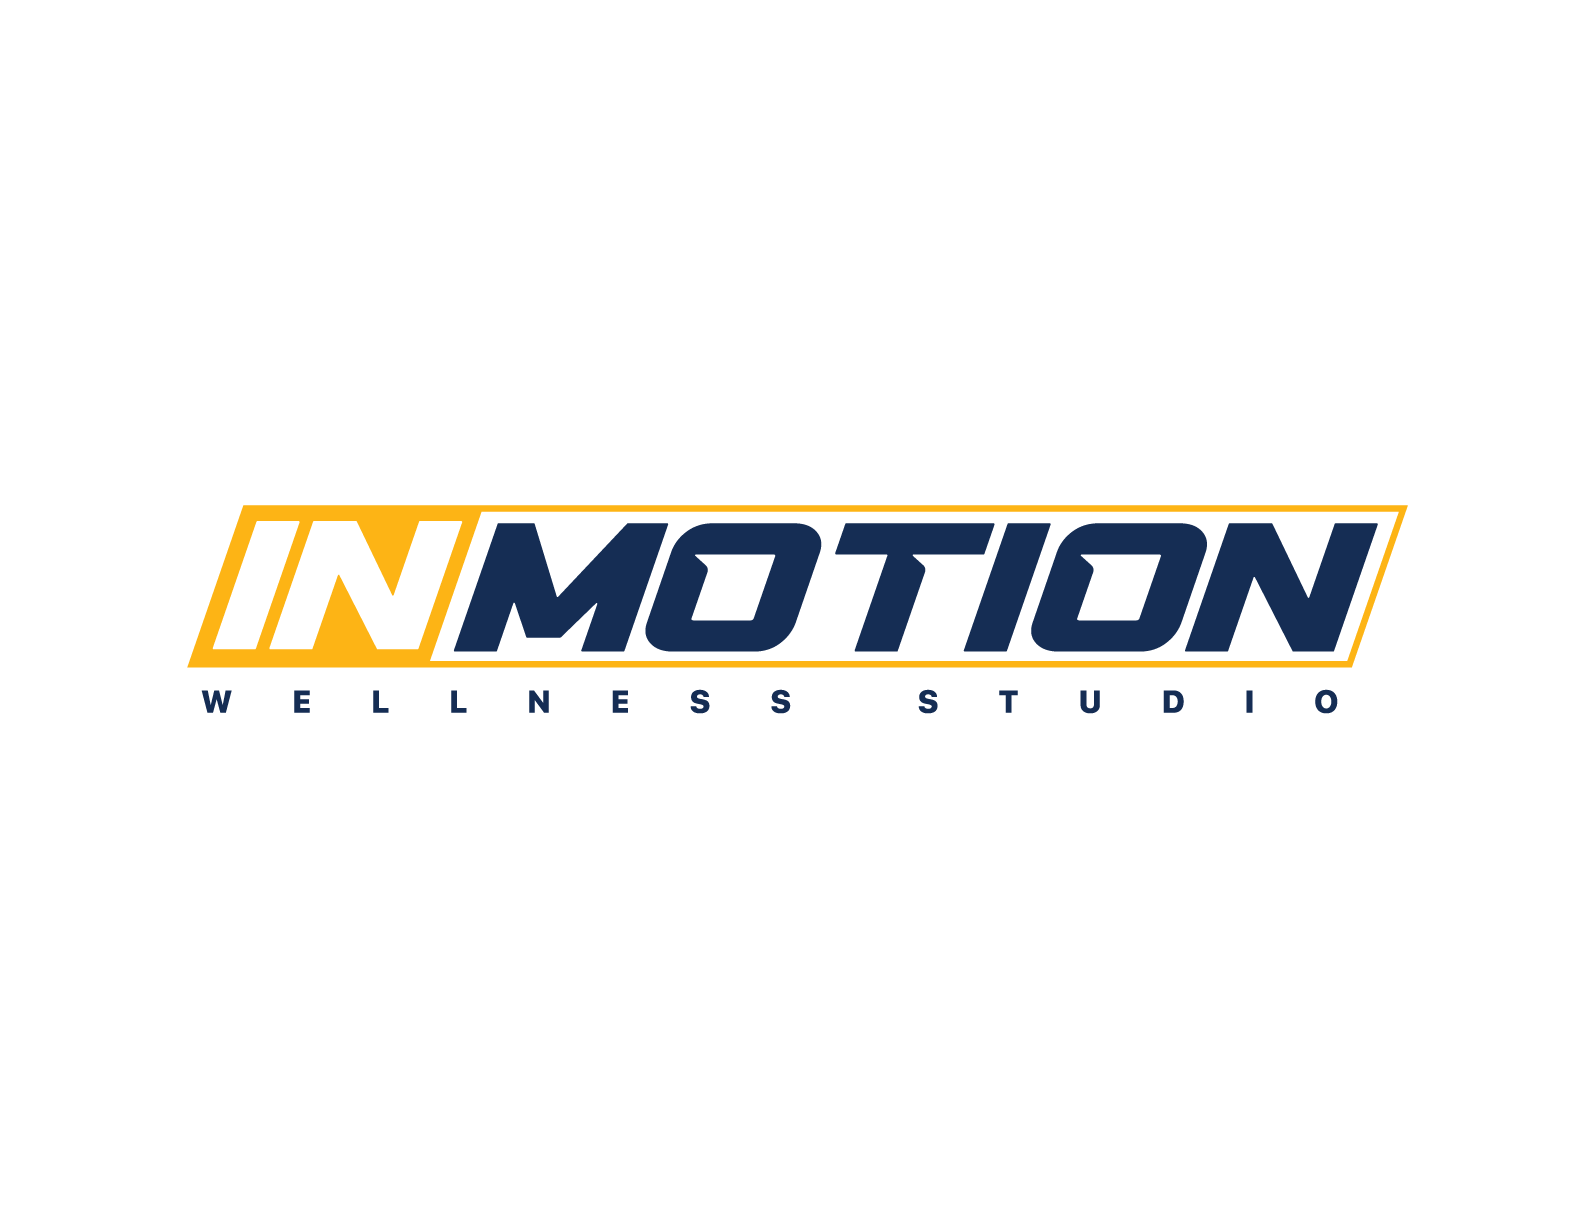 in_motion_logo_final (1).png